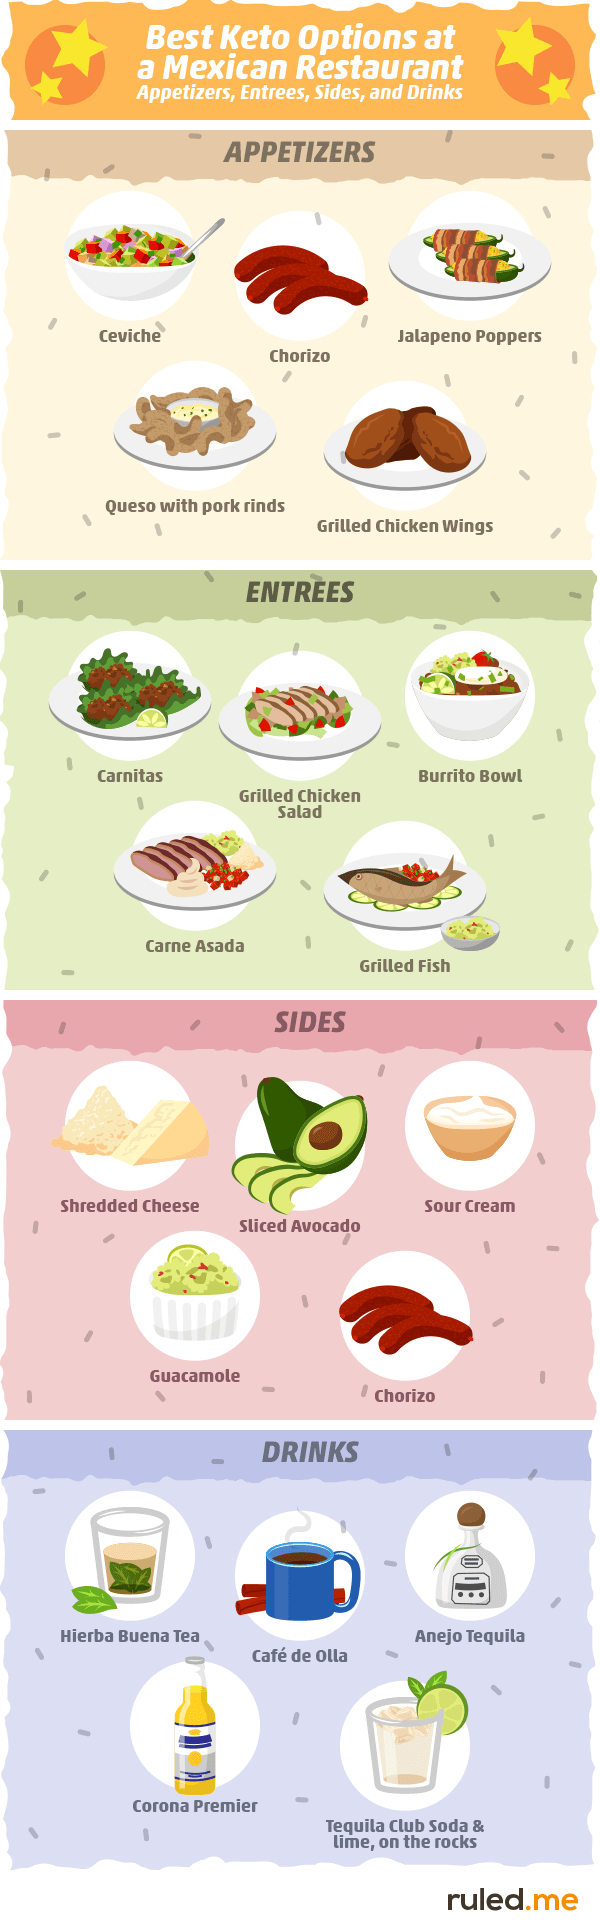 Best Keto Options at a Mexican Restaurant: Appetizers, Entrees, Sides, and Drinks